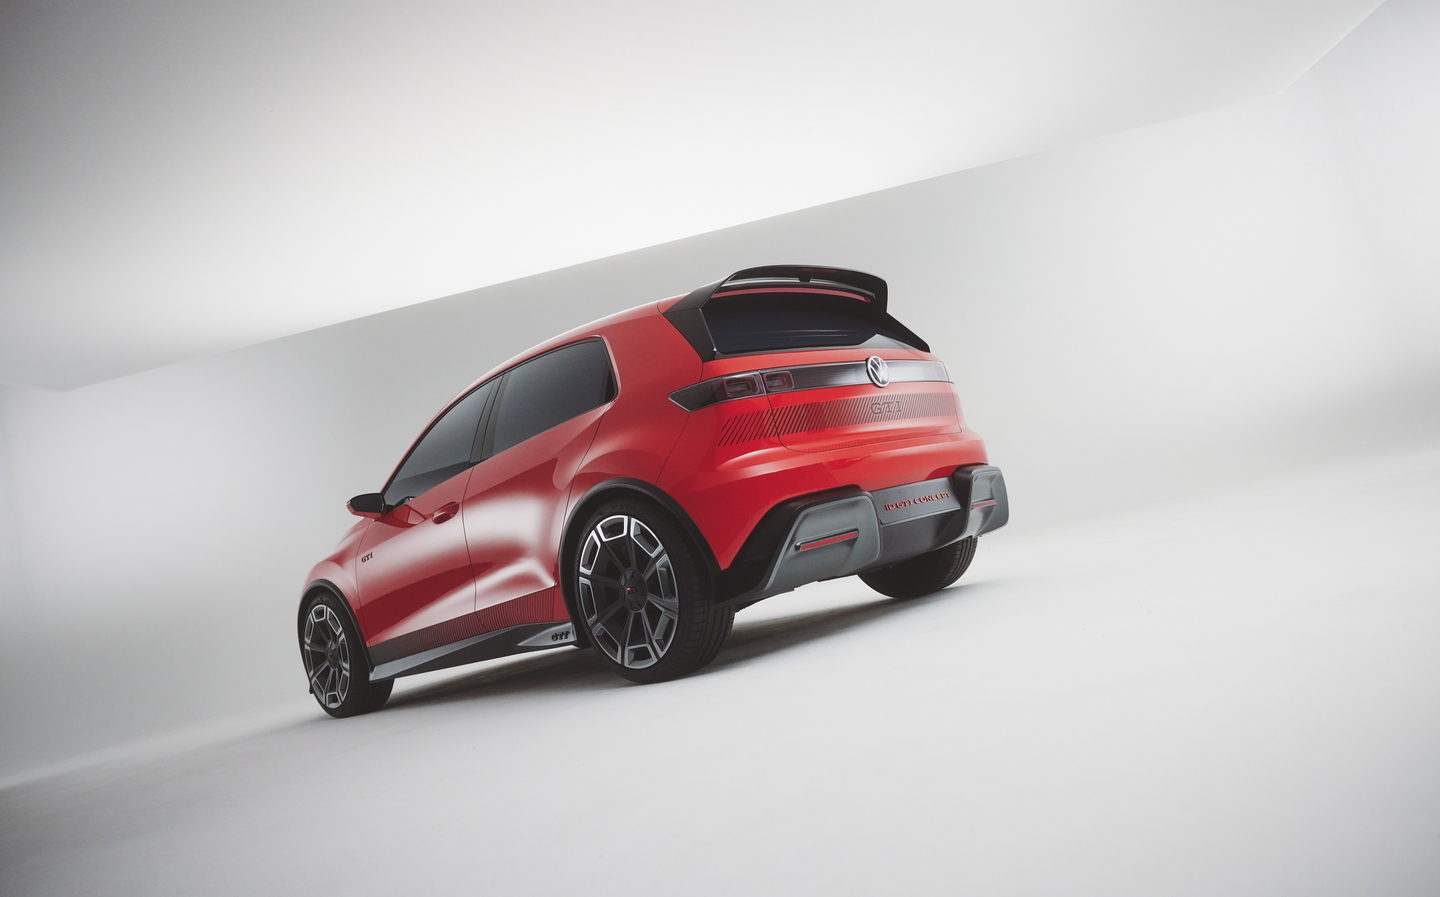 concept car, electric, hot hatch, id. gti, munich motor show, volkswagen, volkswagen id. gti concept previews fast version of forthcoming id.2 electric car